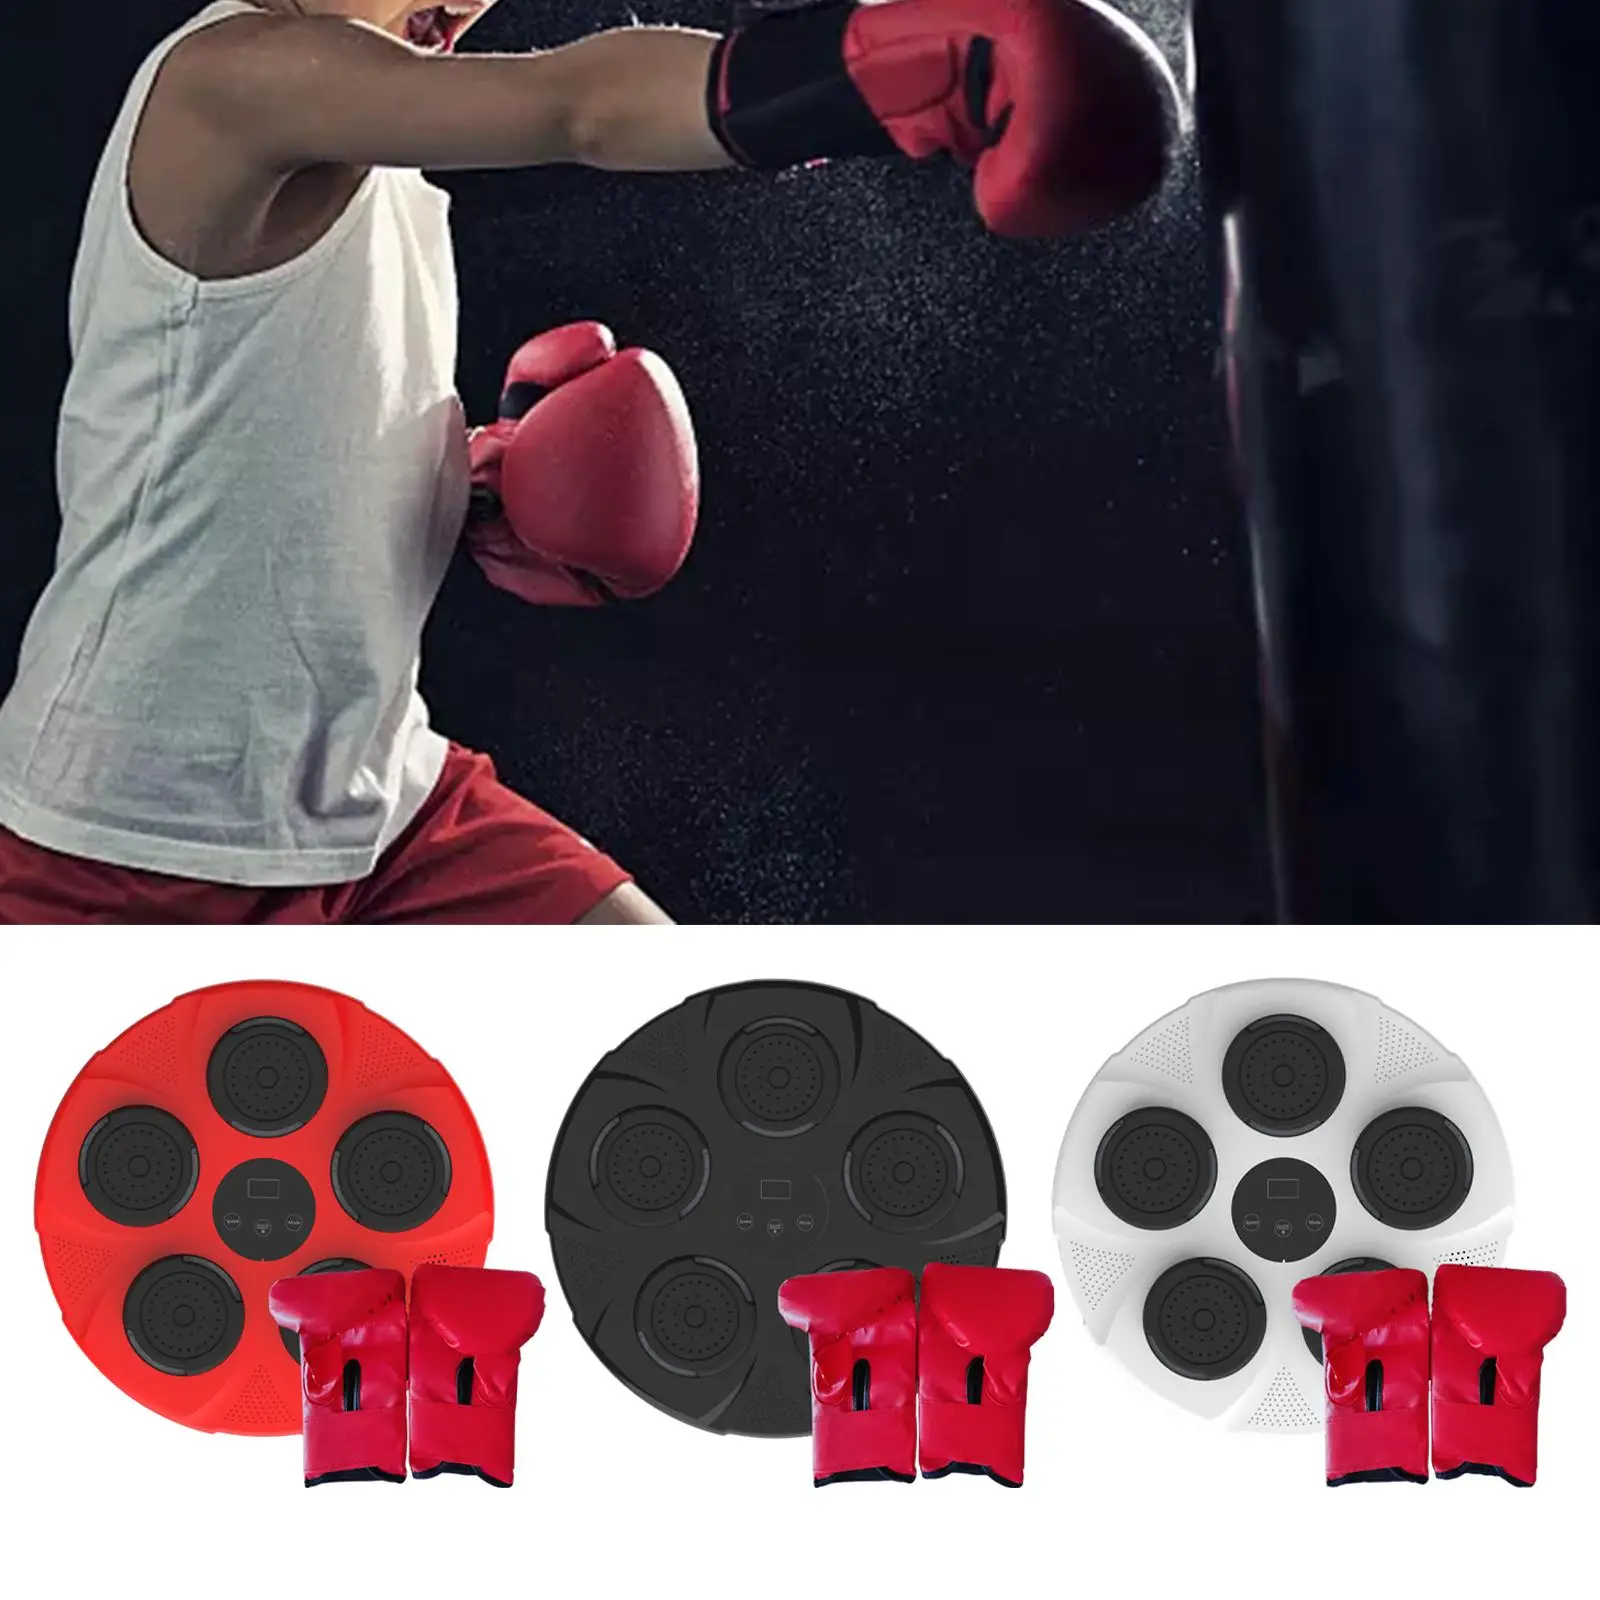 Boxing Machine Electronic Boxing Wall Target for Strength Training Sports